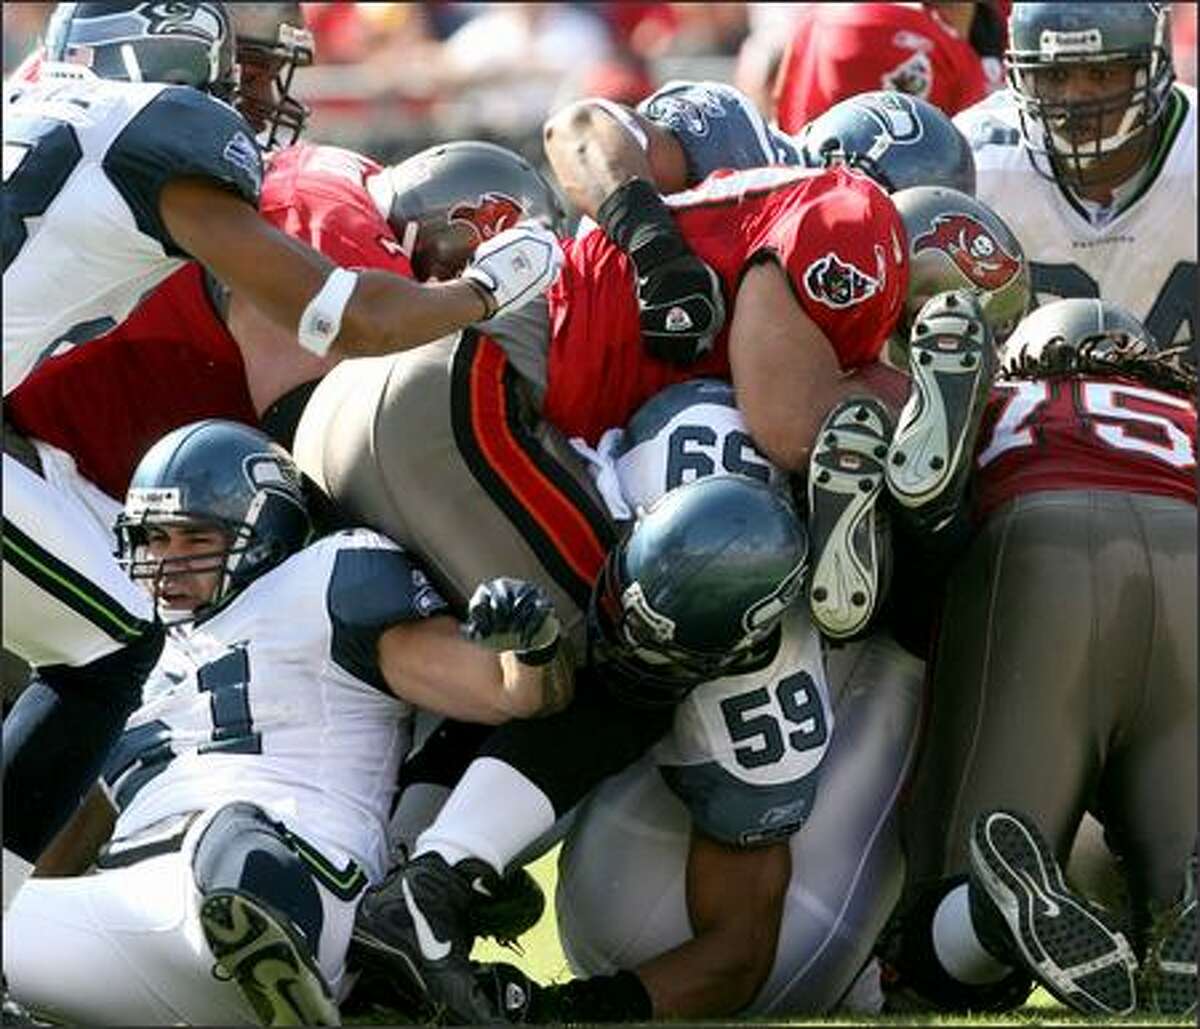 The Seahawks defense gang-tackles Mike Alstott for no gain in the first quarter of Sunday's game against the Tampa Bay Buccaneers. Seattle won 23-7.